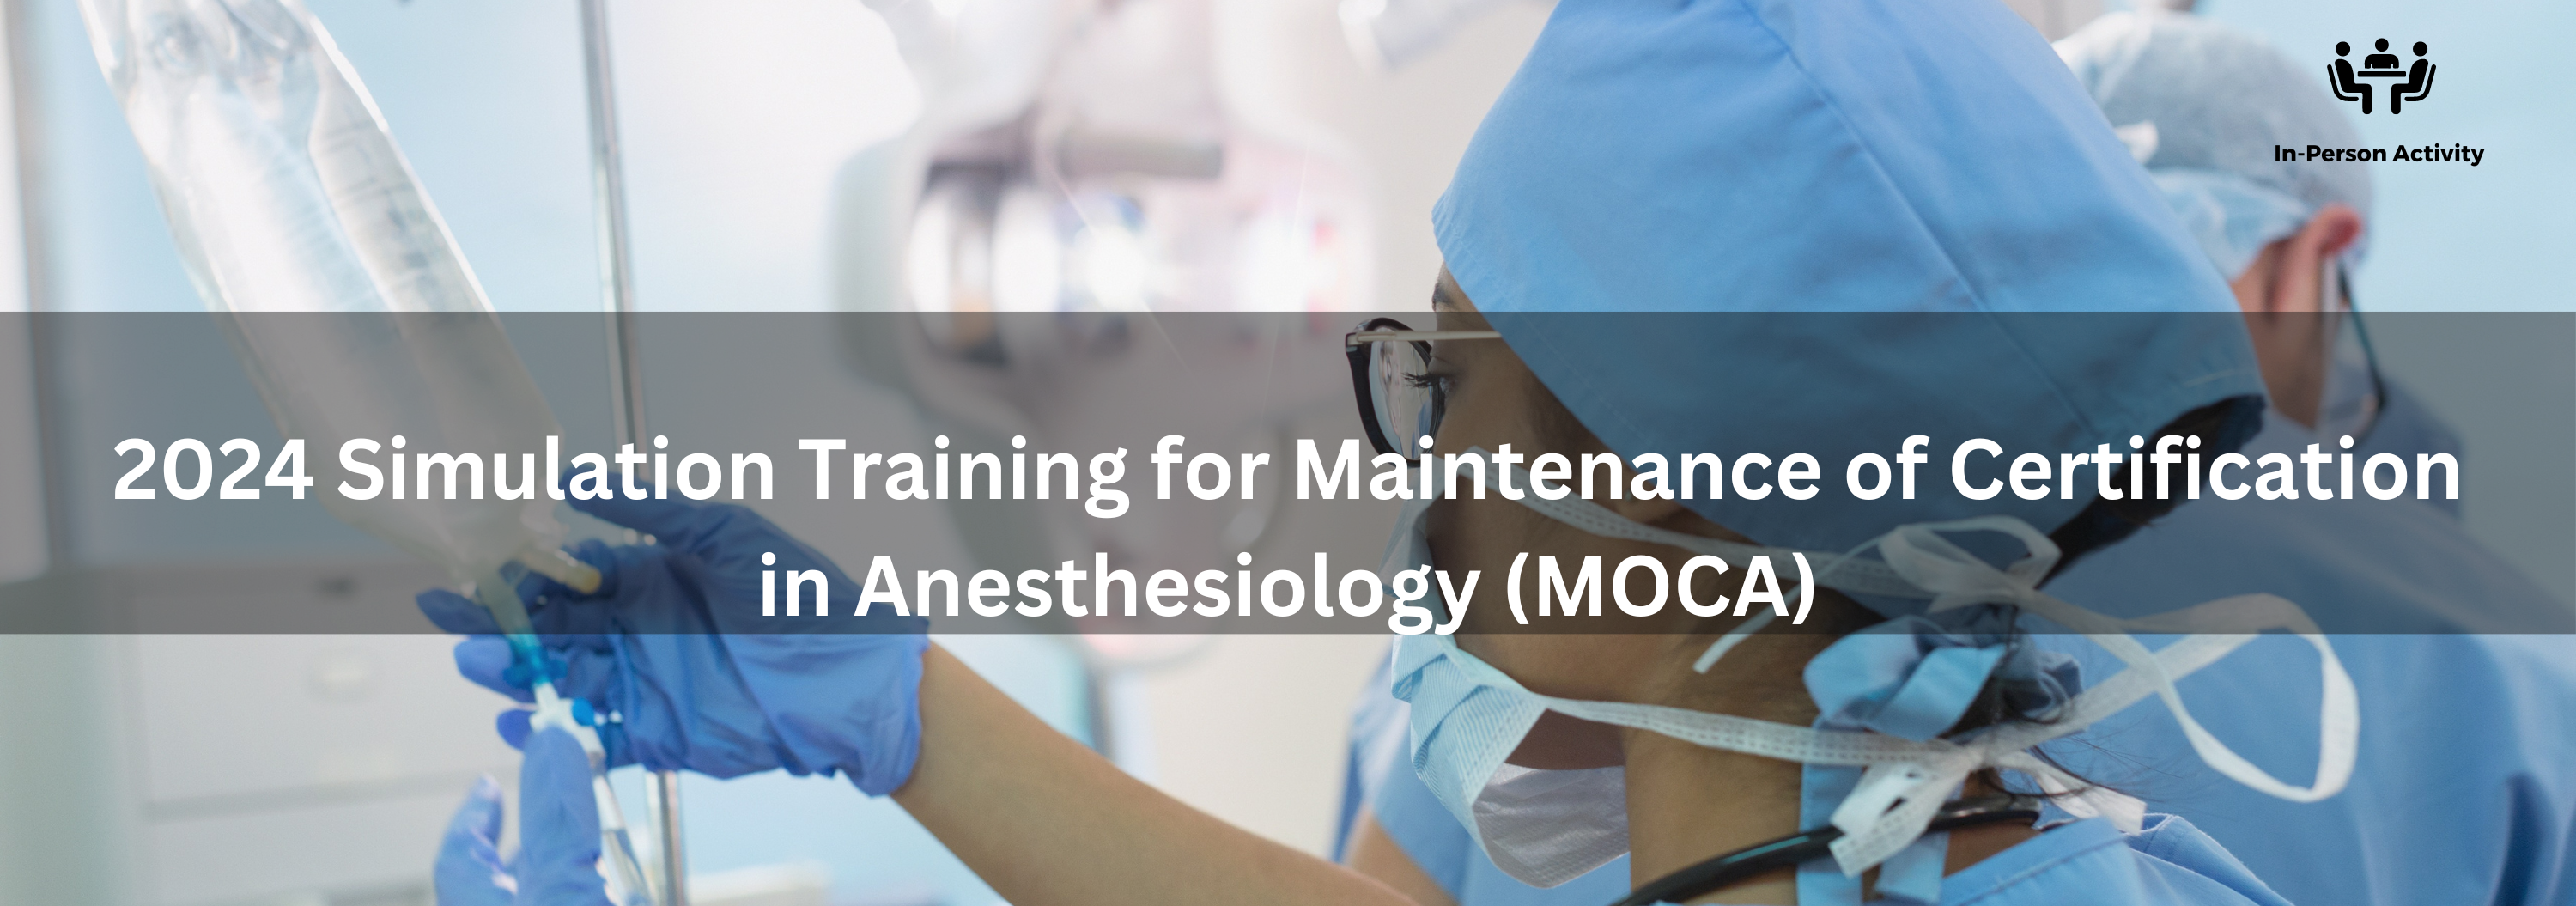 2024 Simulation Training for Maintenance of Certification in Anesthesiology (MOCA) - November Banner